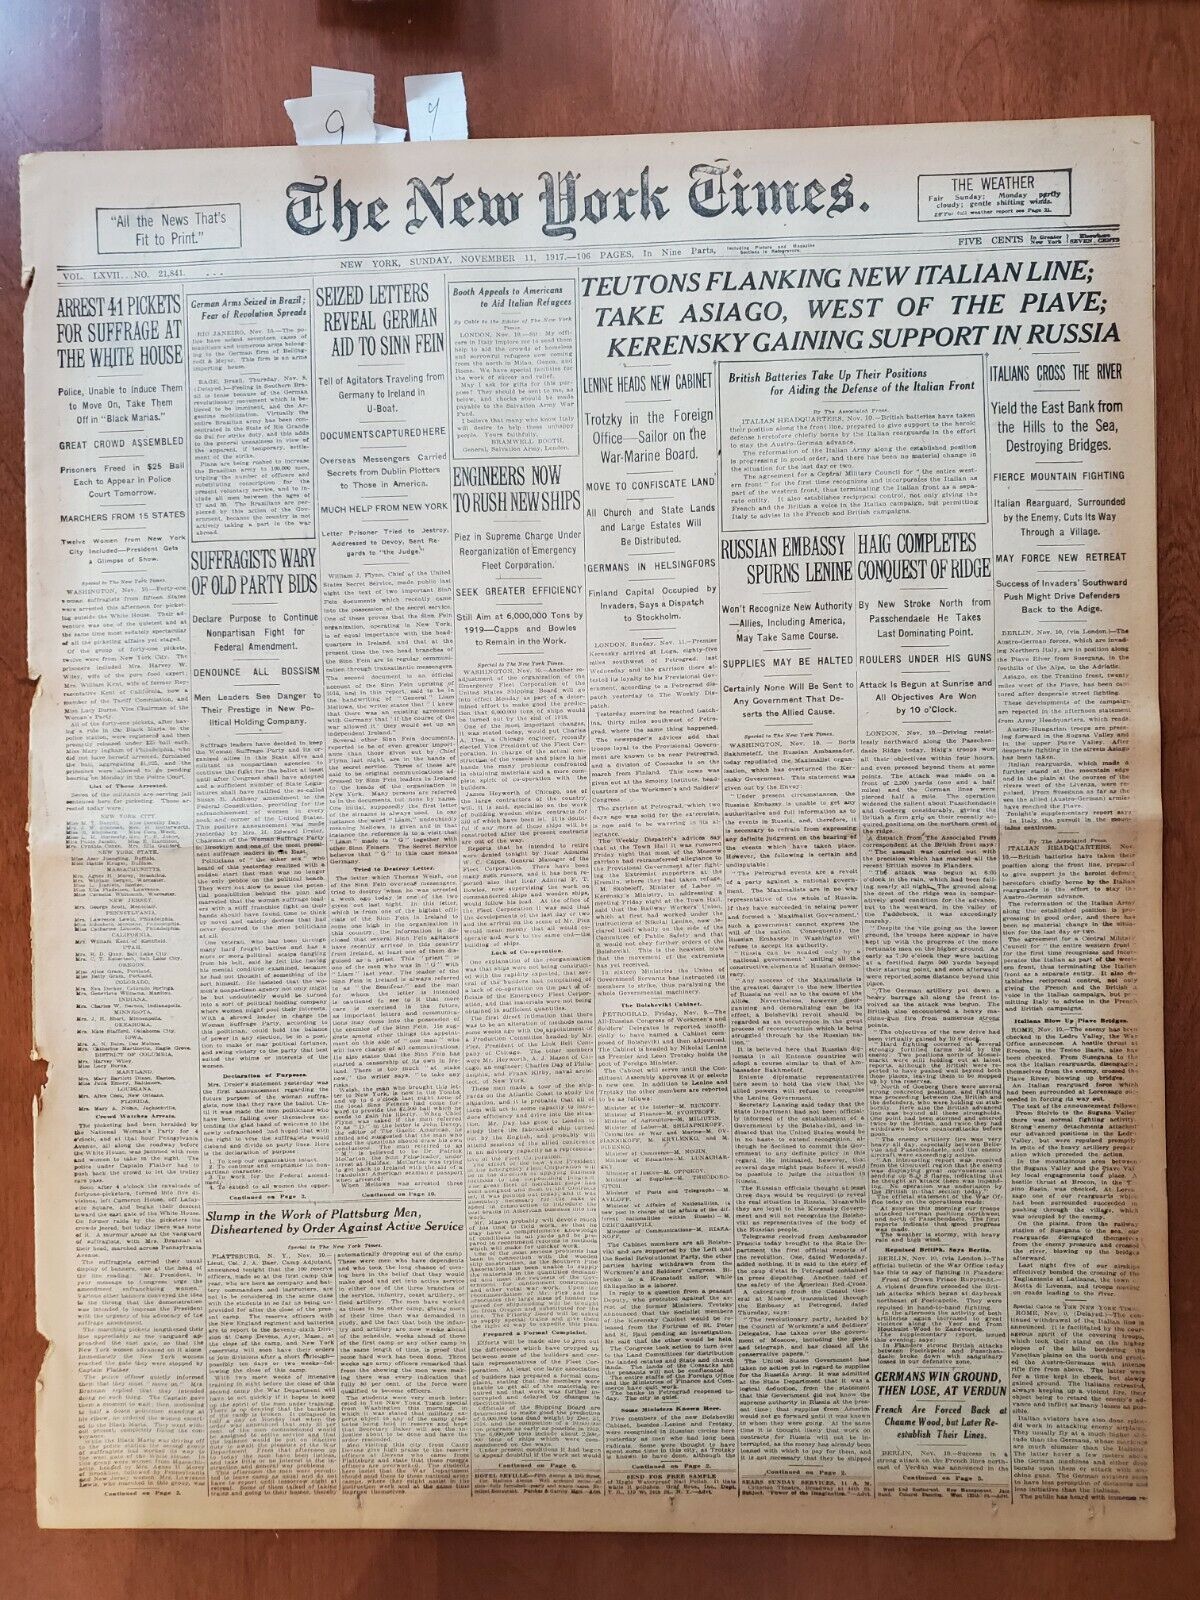 1917 NOVEMBER 11 NEW YORK TIMES - KERENSKY GAINING SUPPORT IN RUSSIA - NT 8066